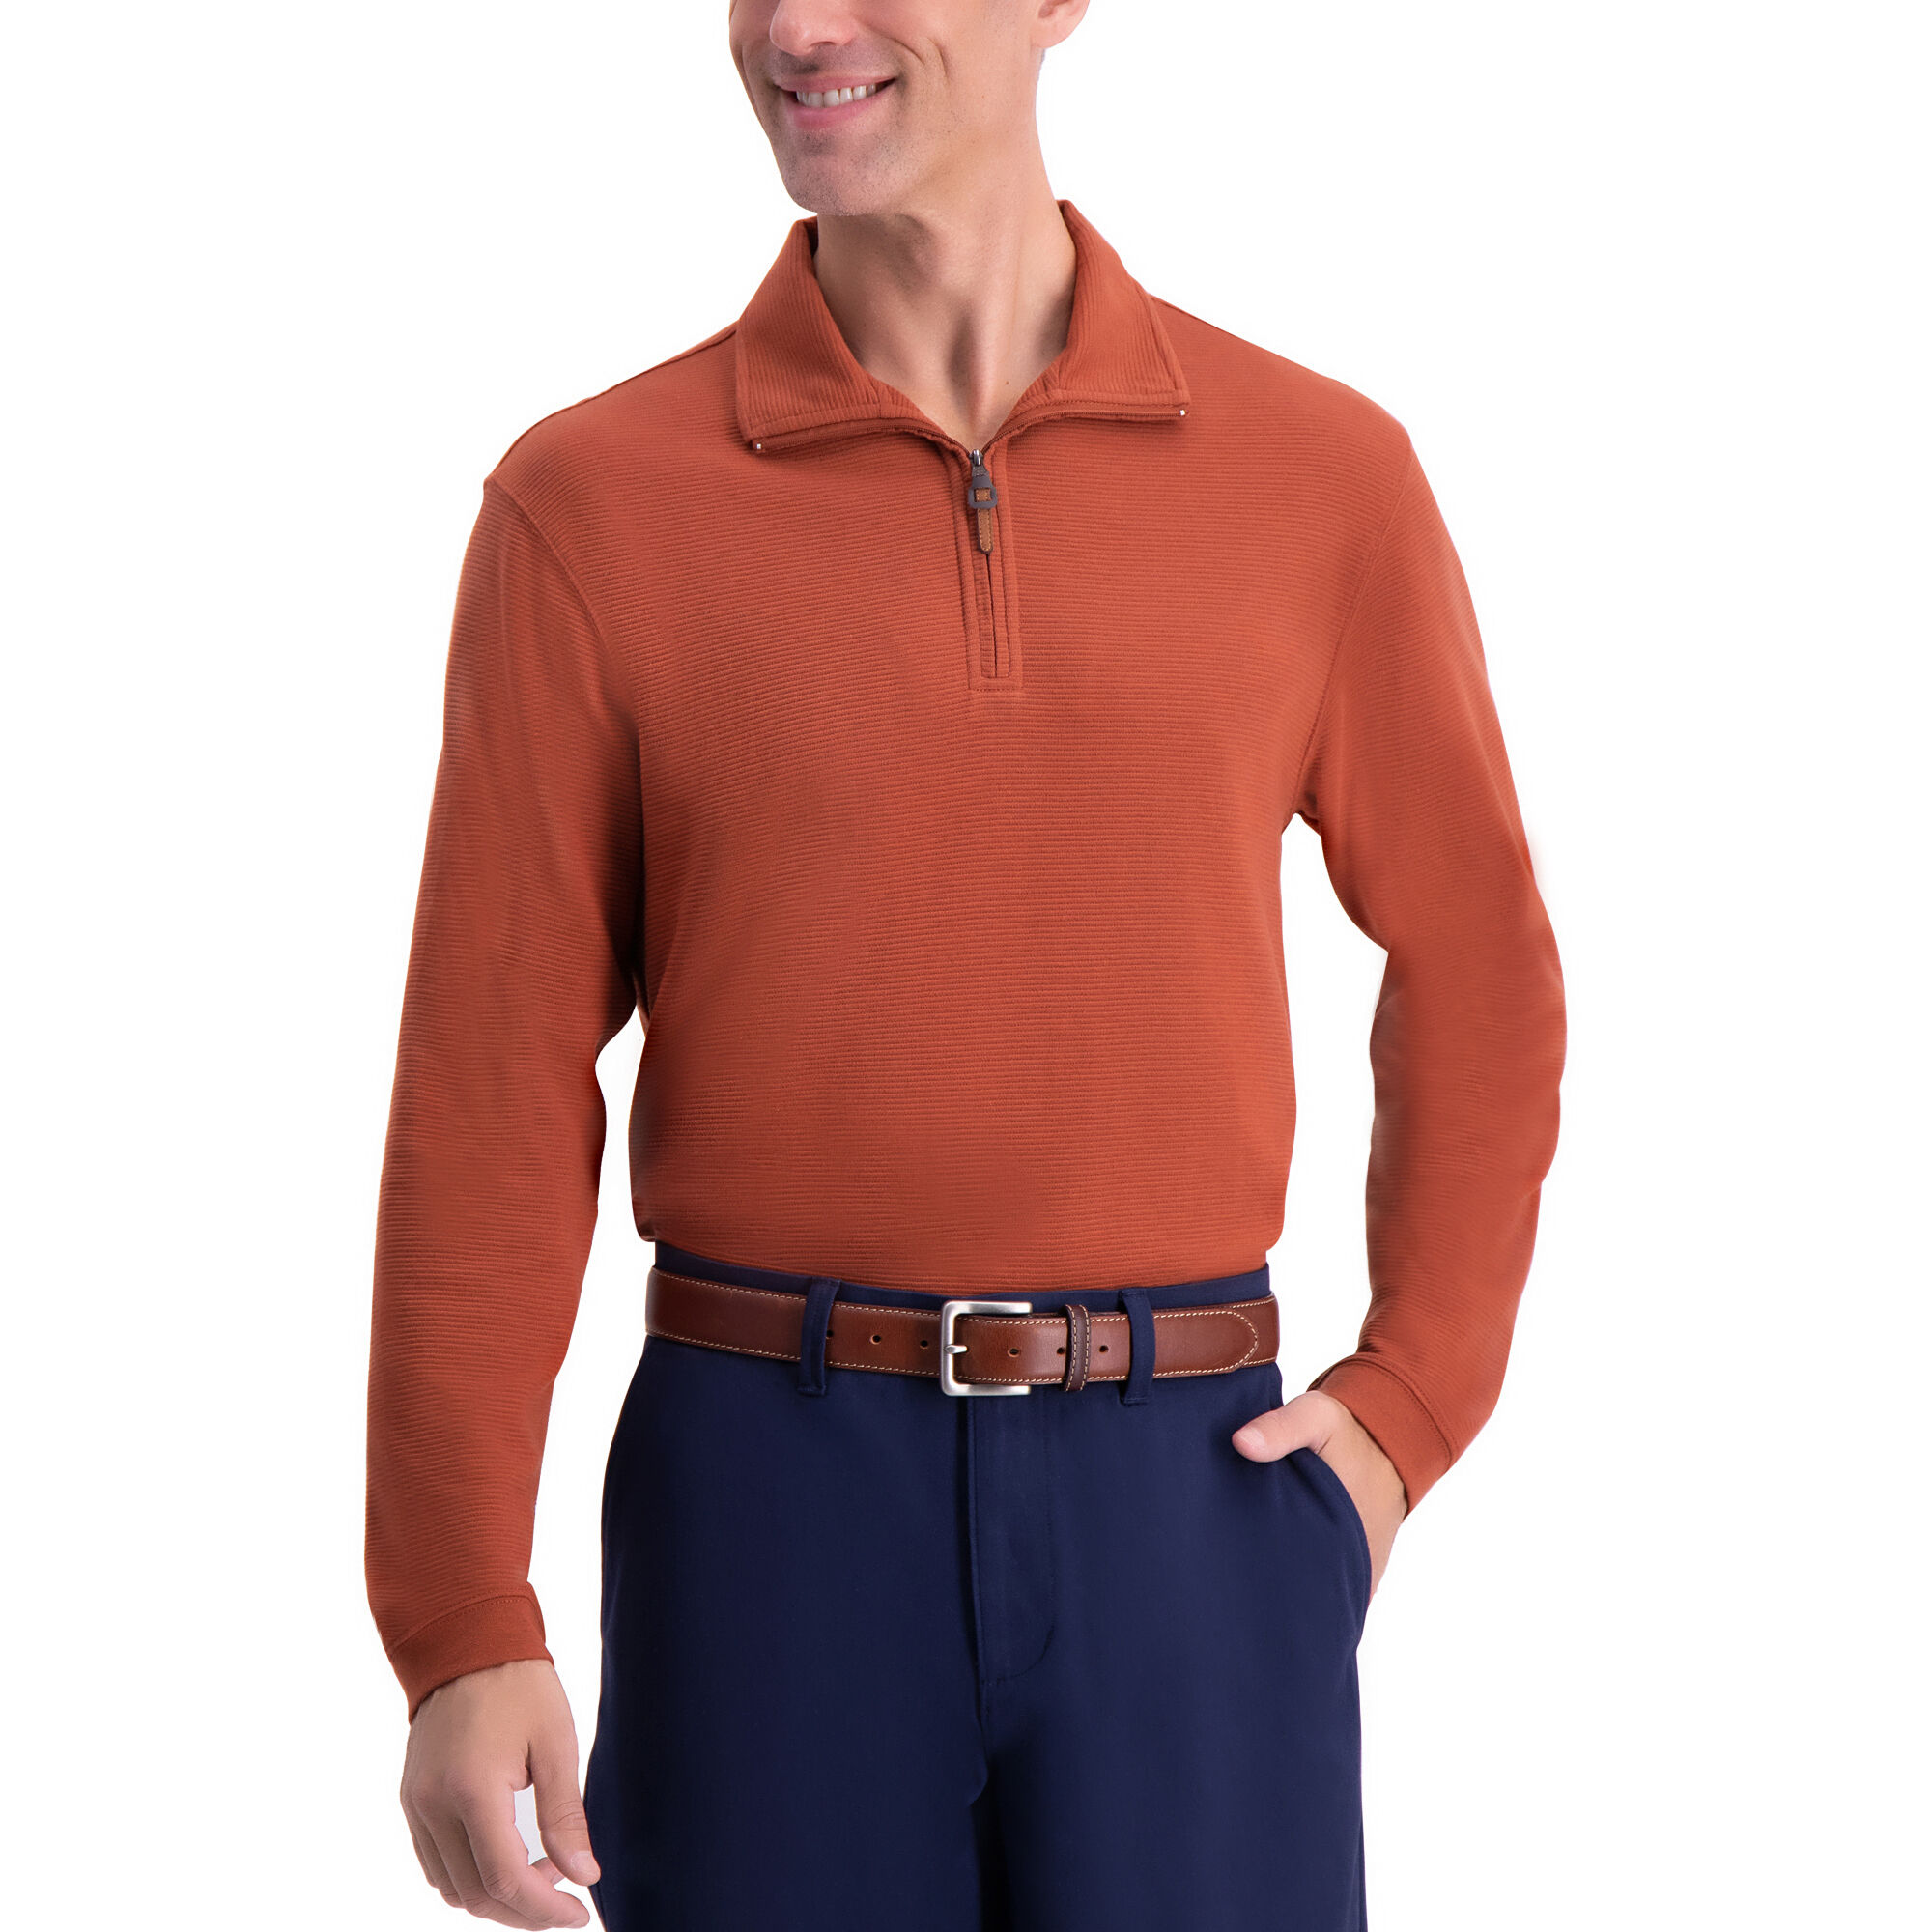 Haggar 1/4 Zip Ribbed Sweater Rust 1/4 Zip Lightweight Cotton Poly Blend Machine Washable Imported Style #: 037477 Size - S